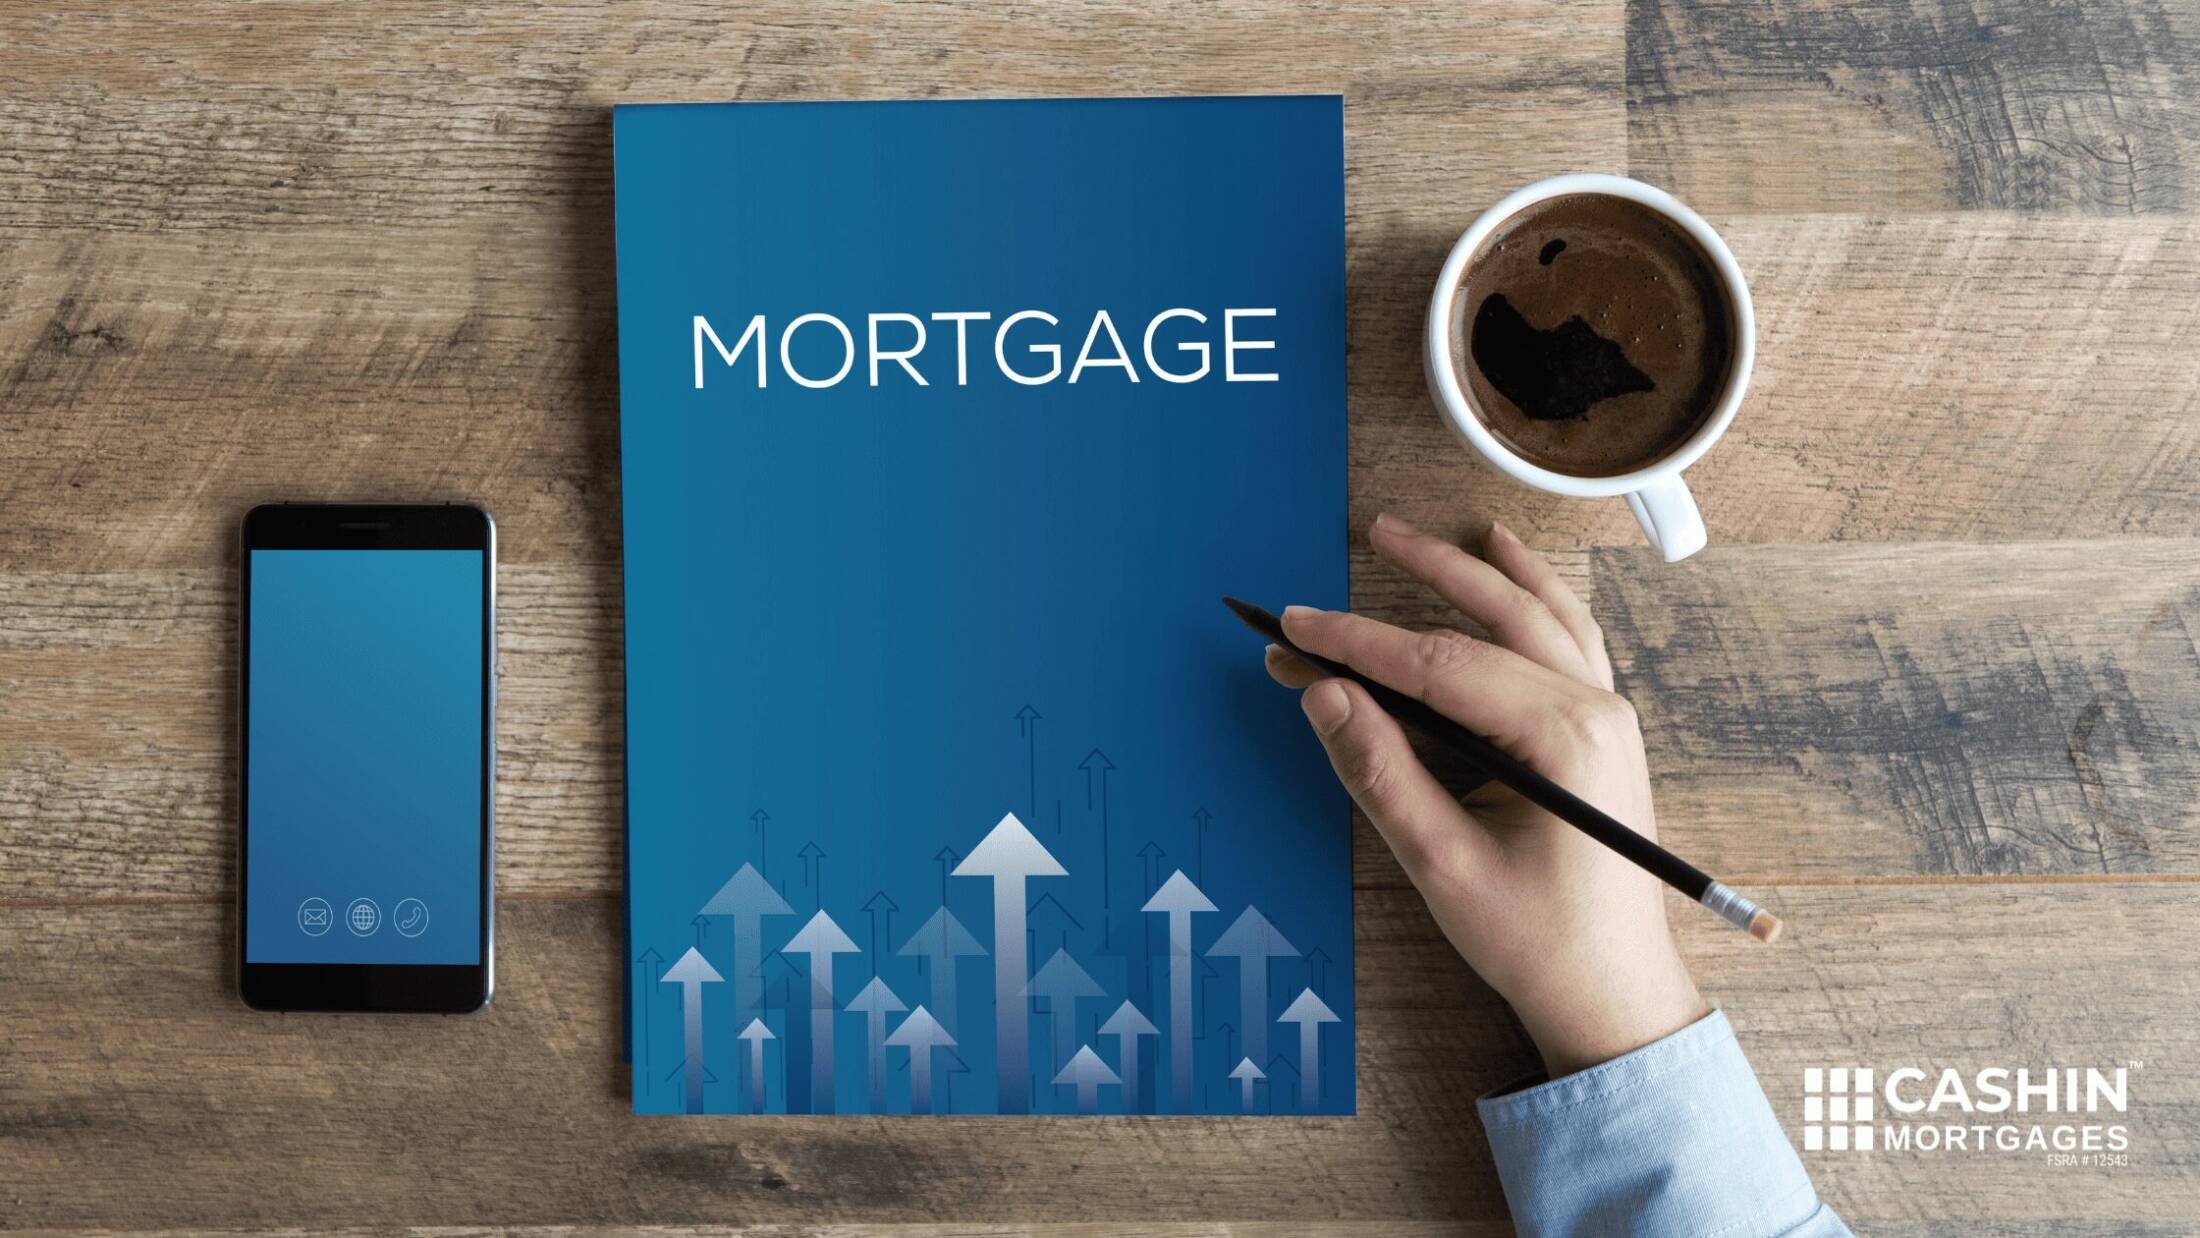 Nosis mortgages